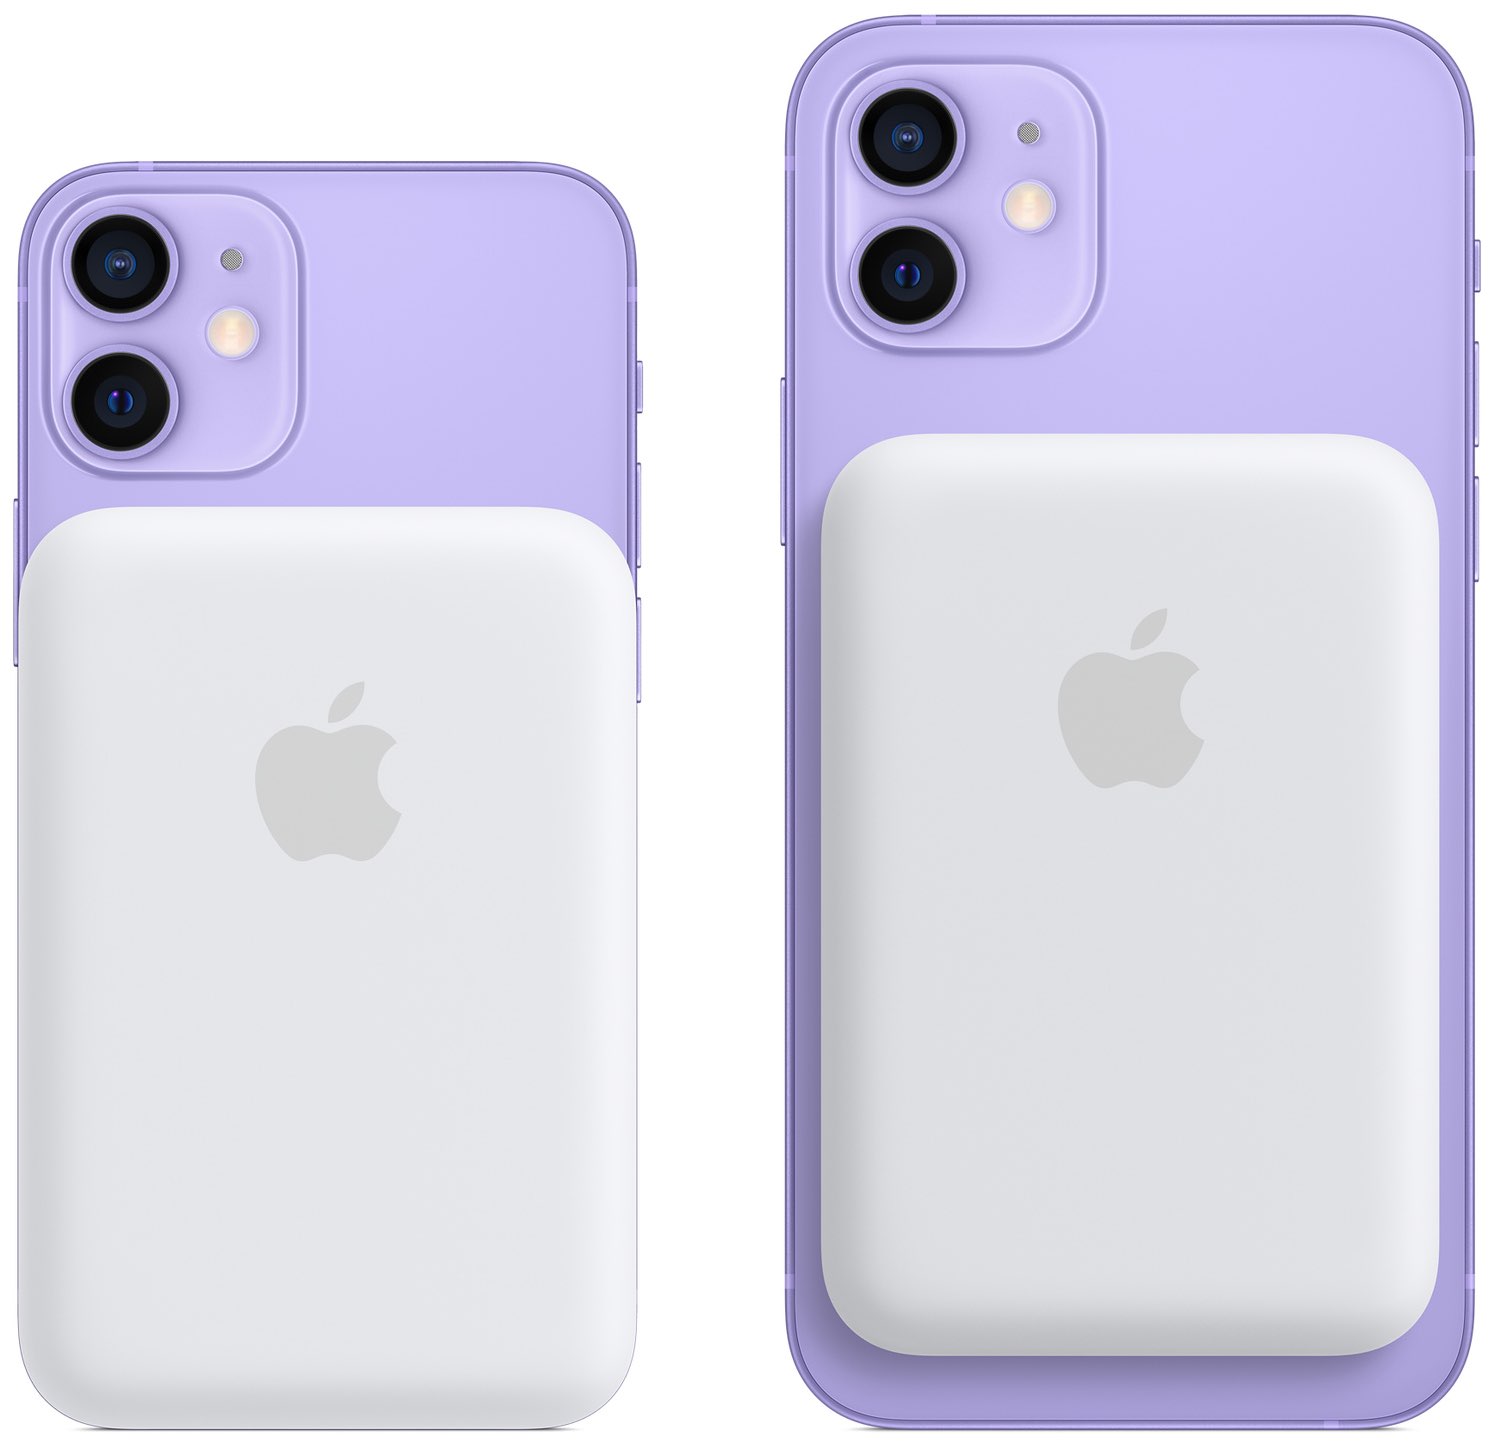 Promotional graphics showing the back of iPhone 12 mini and iPhone 12 in purple with Apple MagSafe Battery Pack attached magnetically on the back